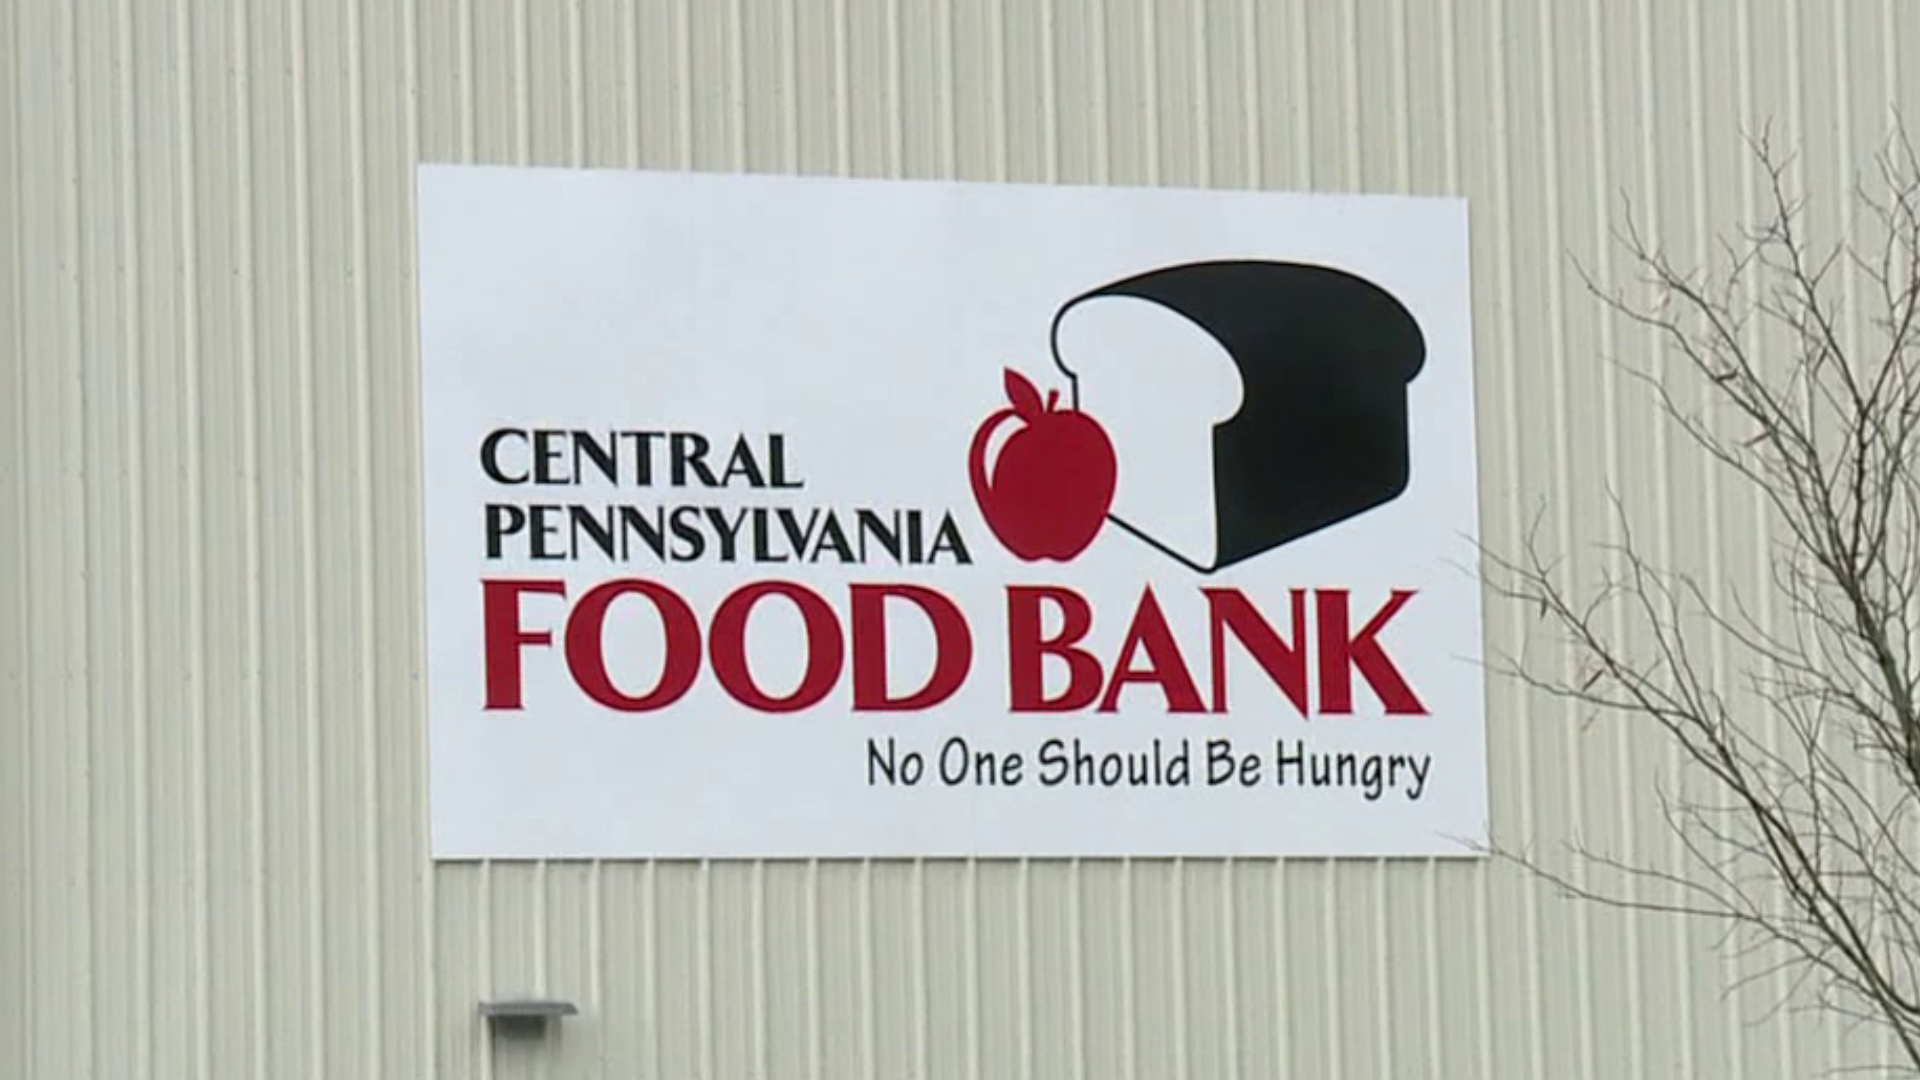 The Central Pennsylvania Food Bank is asking people to change the way they shop at grocery stores during the pandemic.